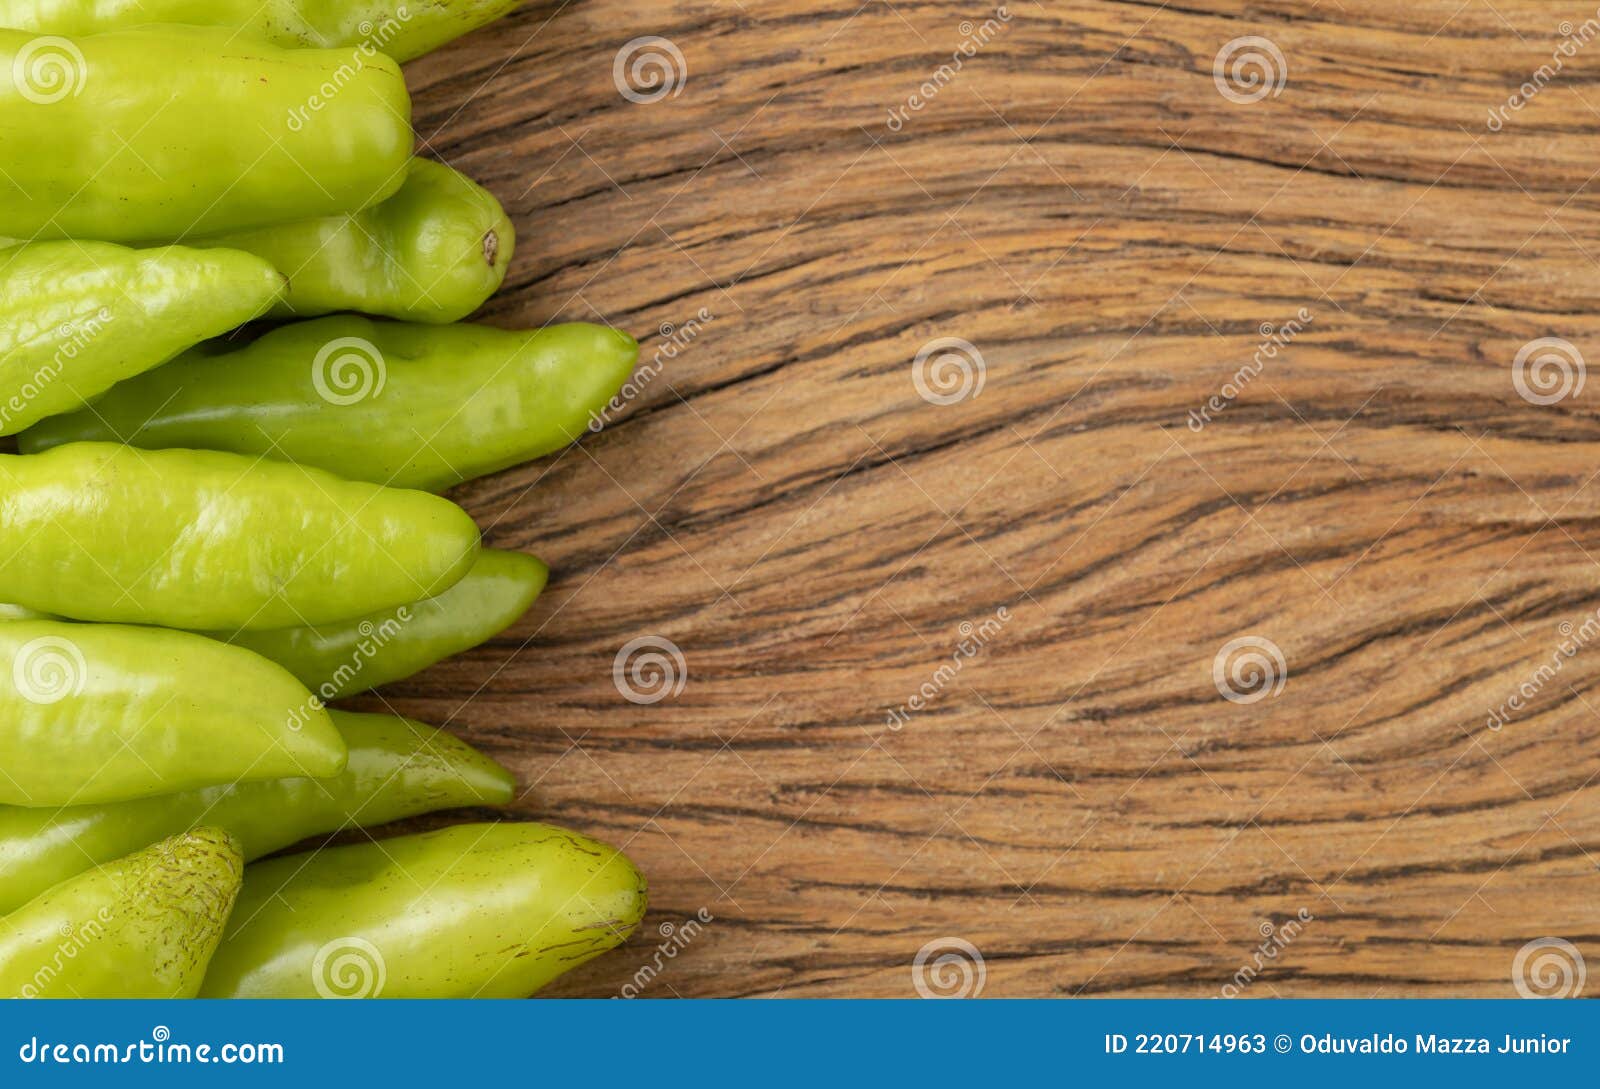 green cheiro smell,scent peppers over wooden table with copy space